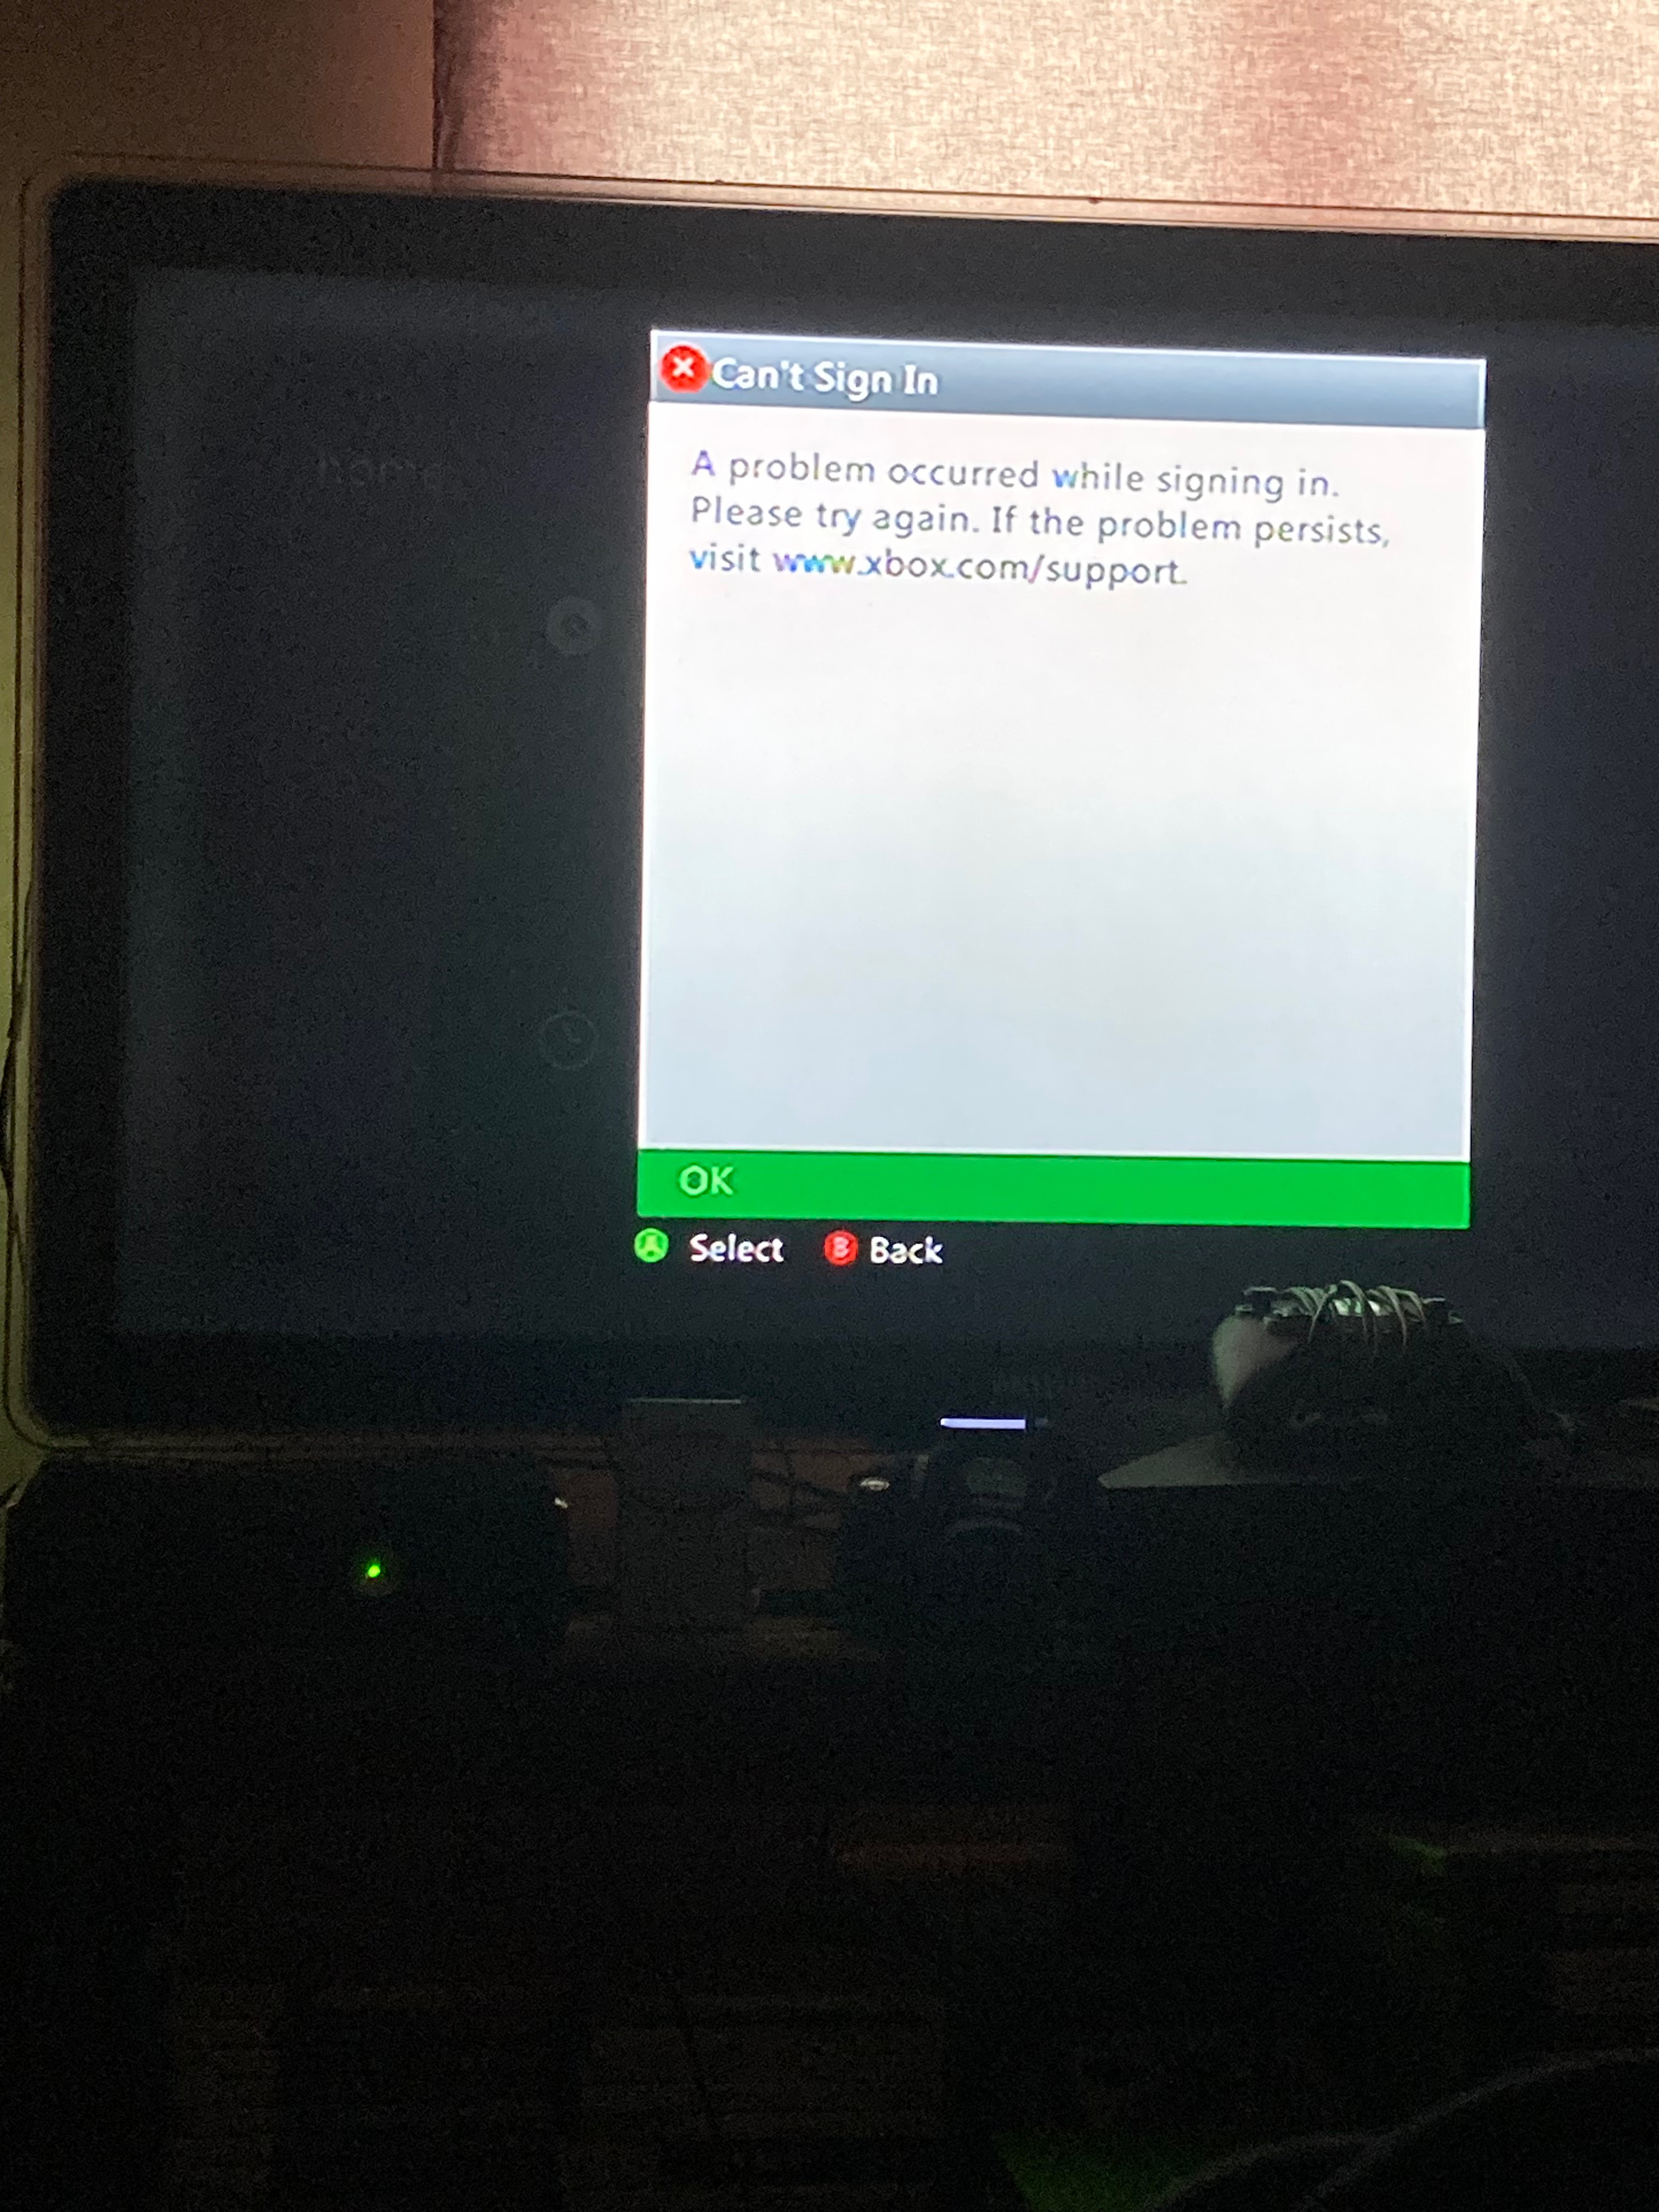 schommel Beurs Misverstand Why is Xbox Live not working on my Xbox 360? - Microsoft Community